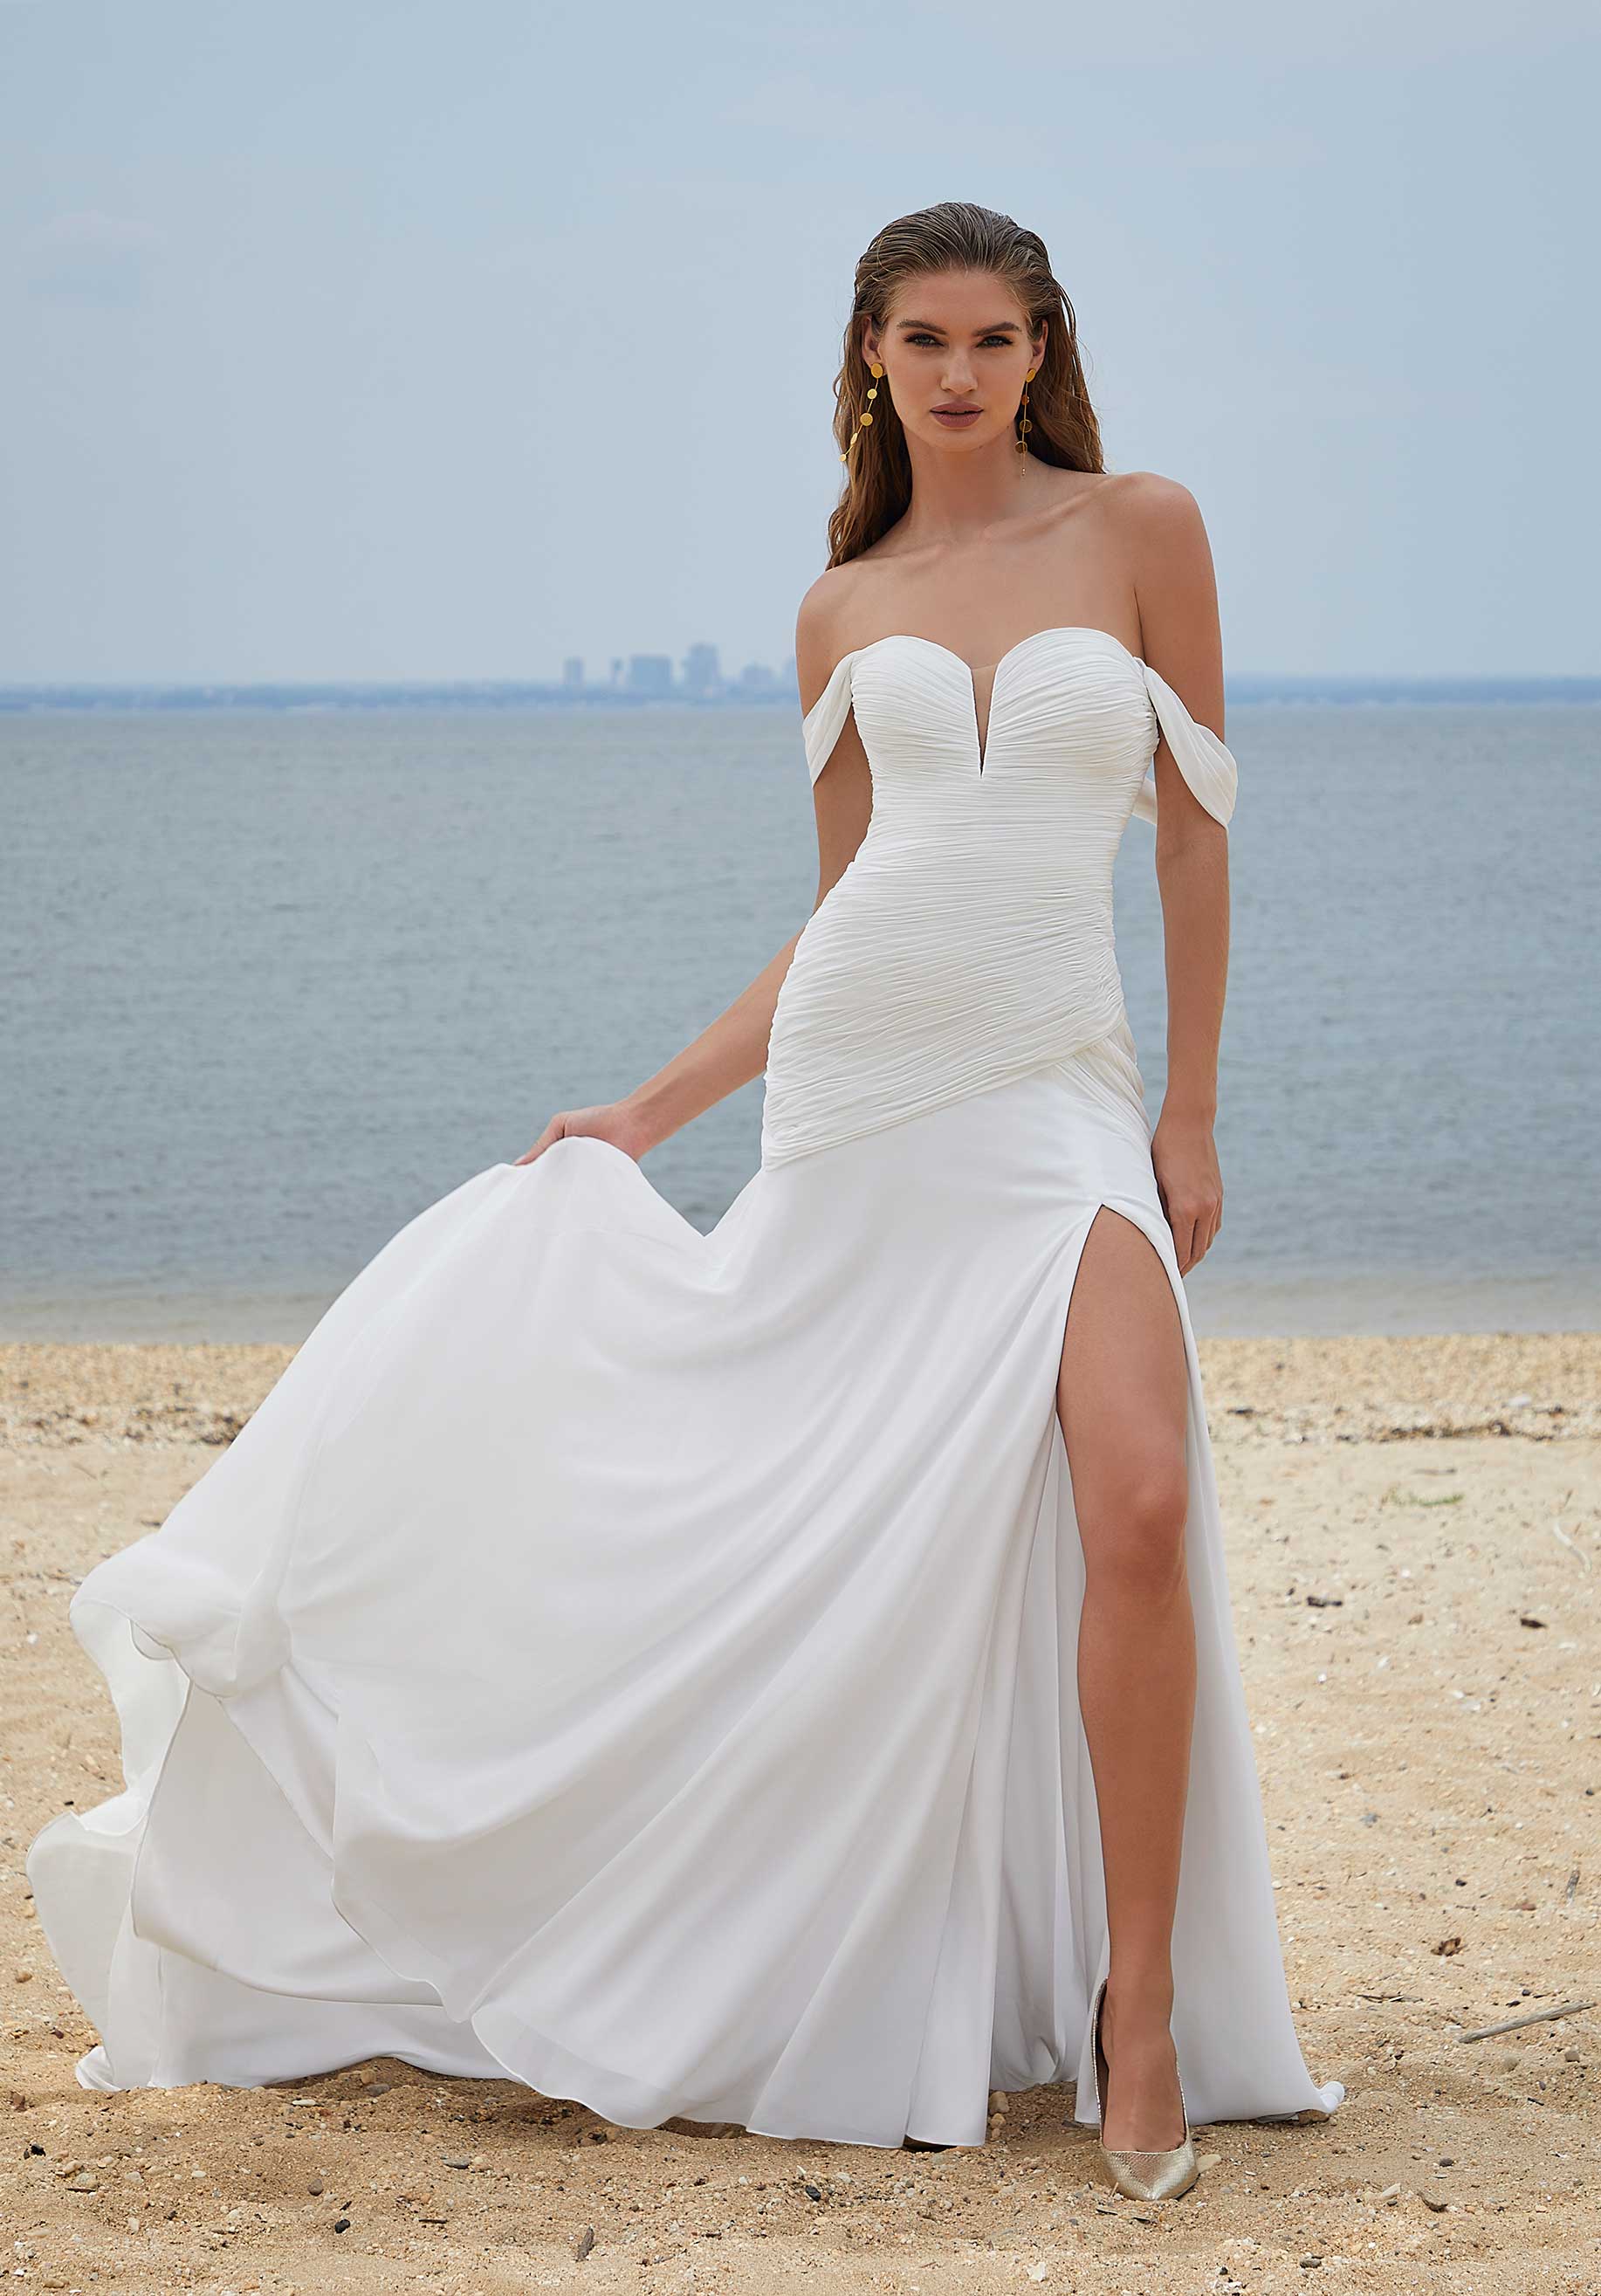 Short Wedding Dresses For Your Ceremony, Reception & Beyond